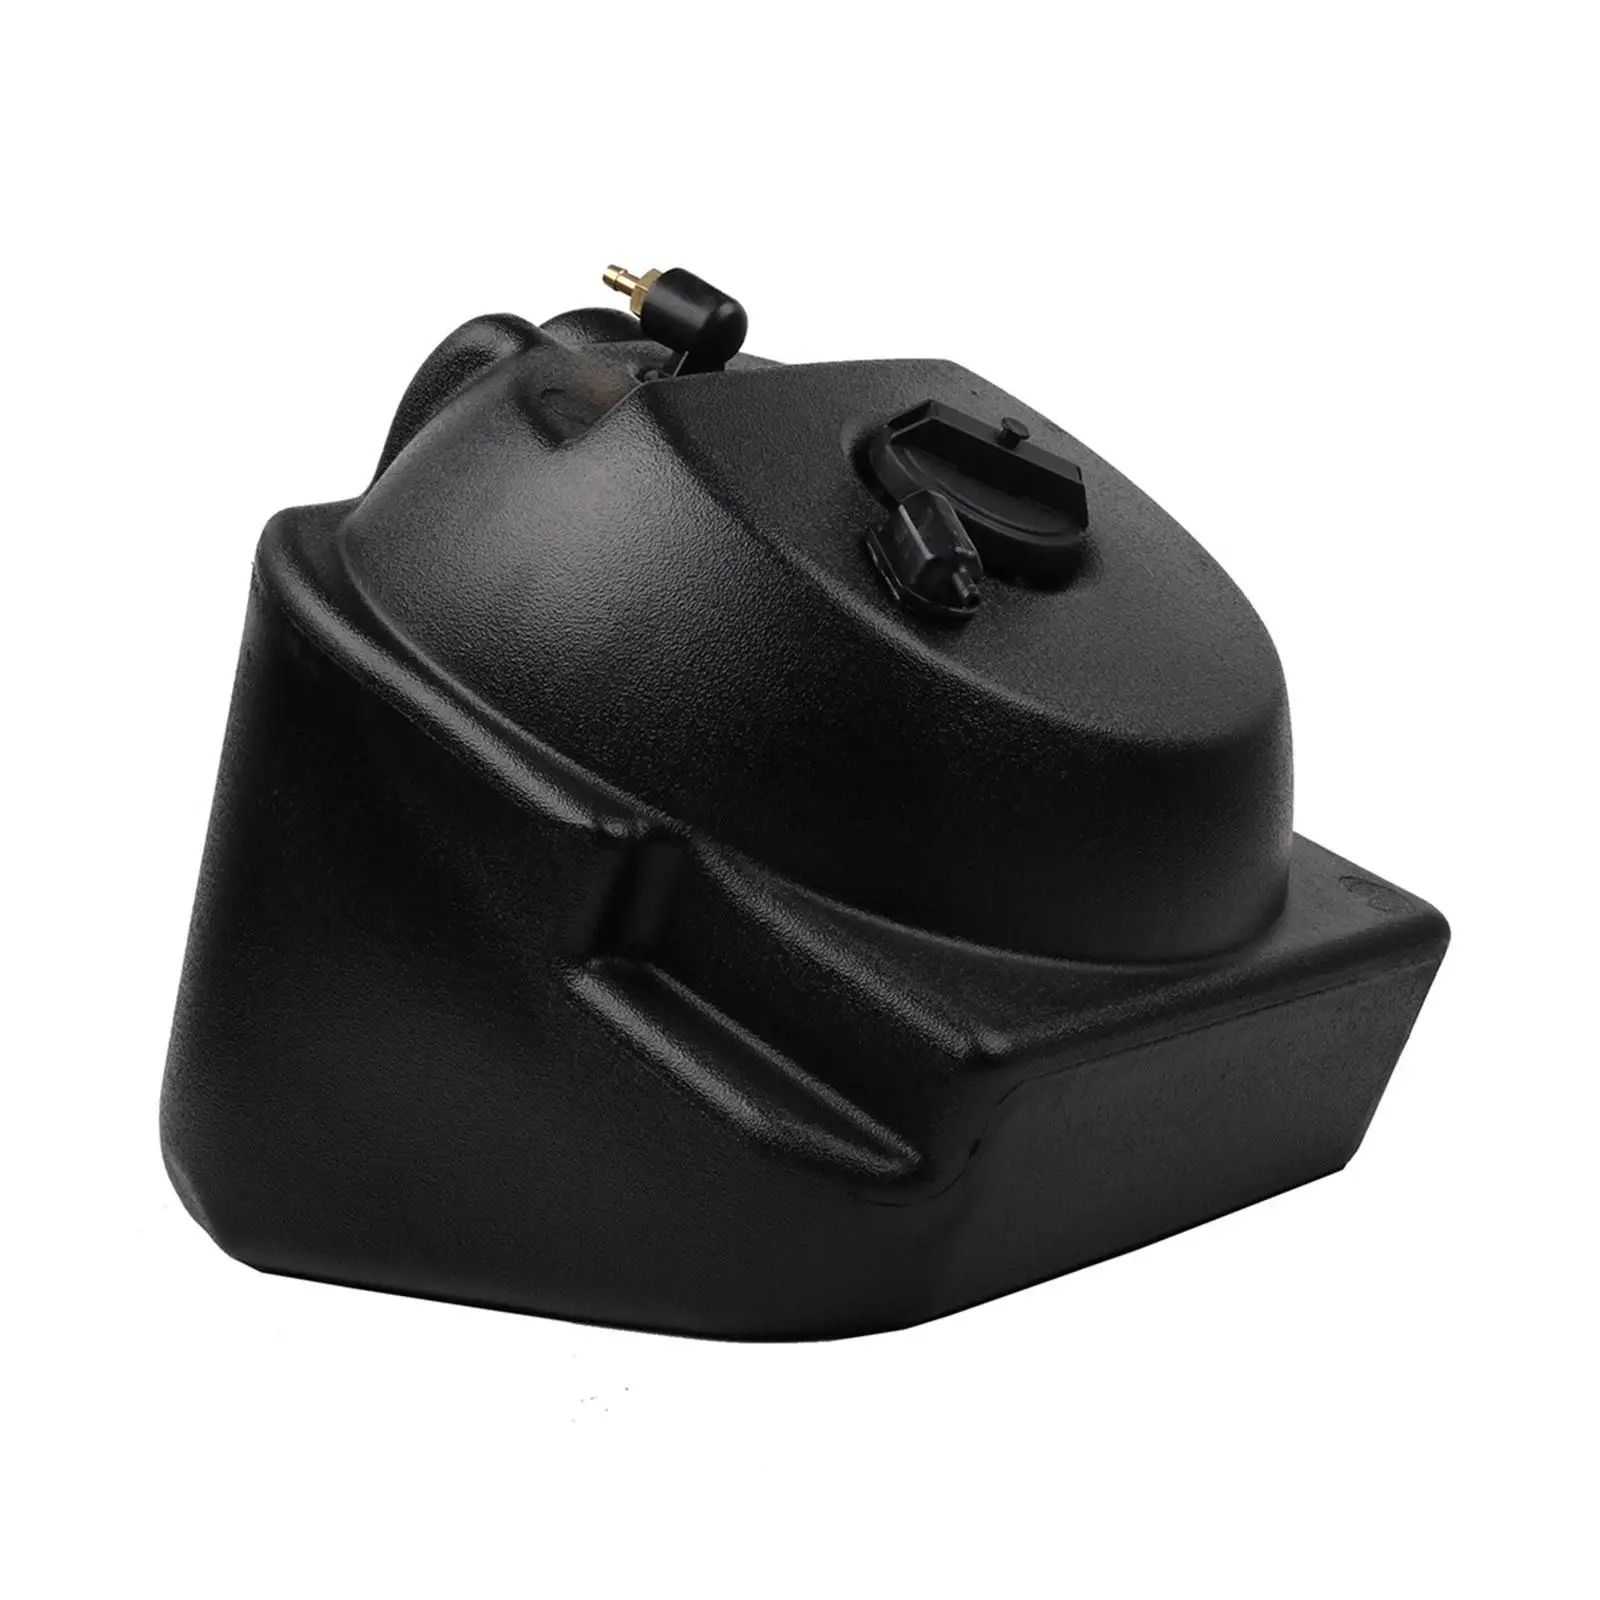 Auxiliary Fuel Tank Motorcycle Accessories Assembly Replacement Oil Tank Fuel Tank Oil Box for Yamaha Xmax300 Tmax560